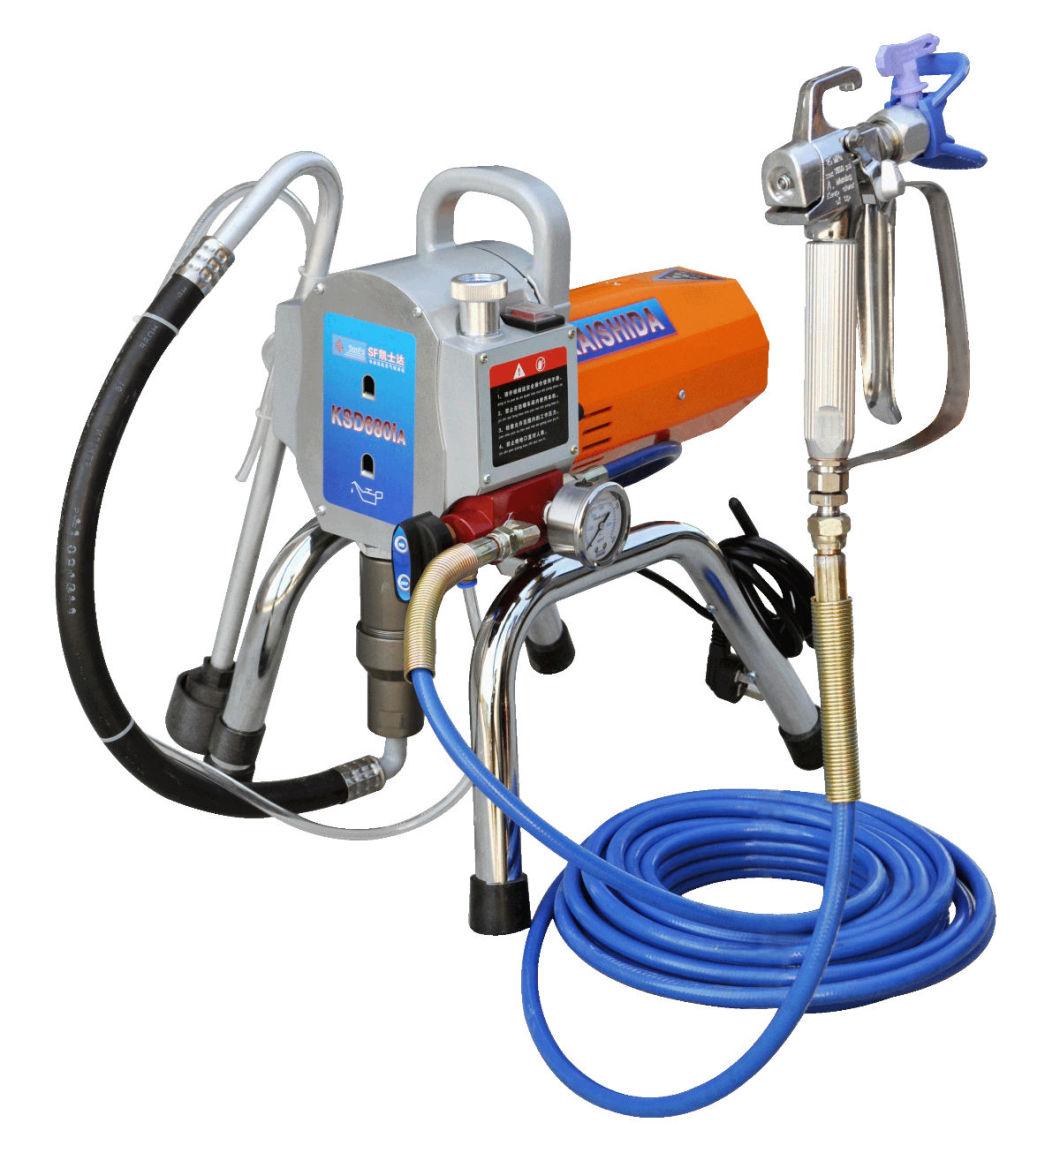 Professional Airless Spray Gun (OURS680I)